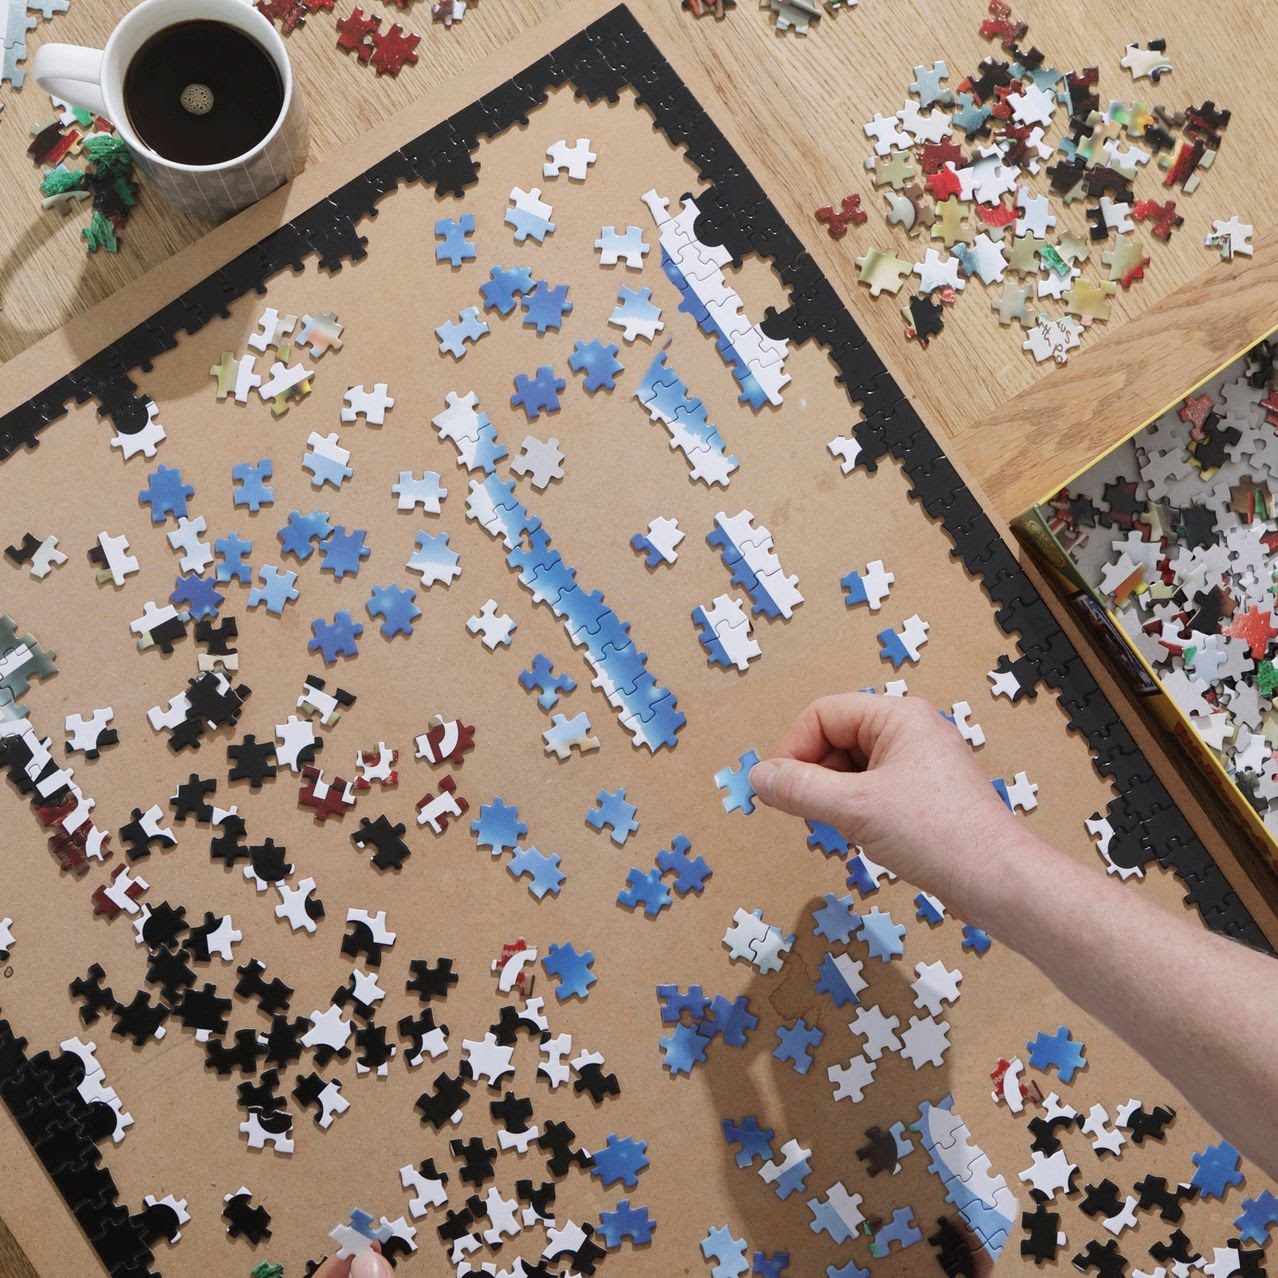 Coronavirus Means Everyone Wants Jigsaw Puzzles. Good Luck Buying One. Demand has taken off, but the world’s largest maker finds itself with fewer ways to get puzzles to puzzlers By Michael M. Phillips